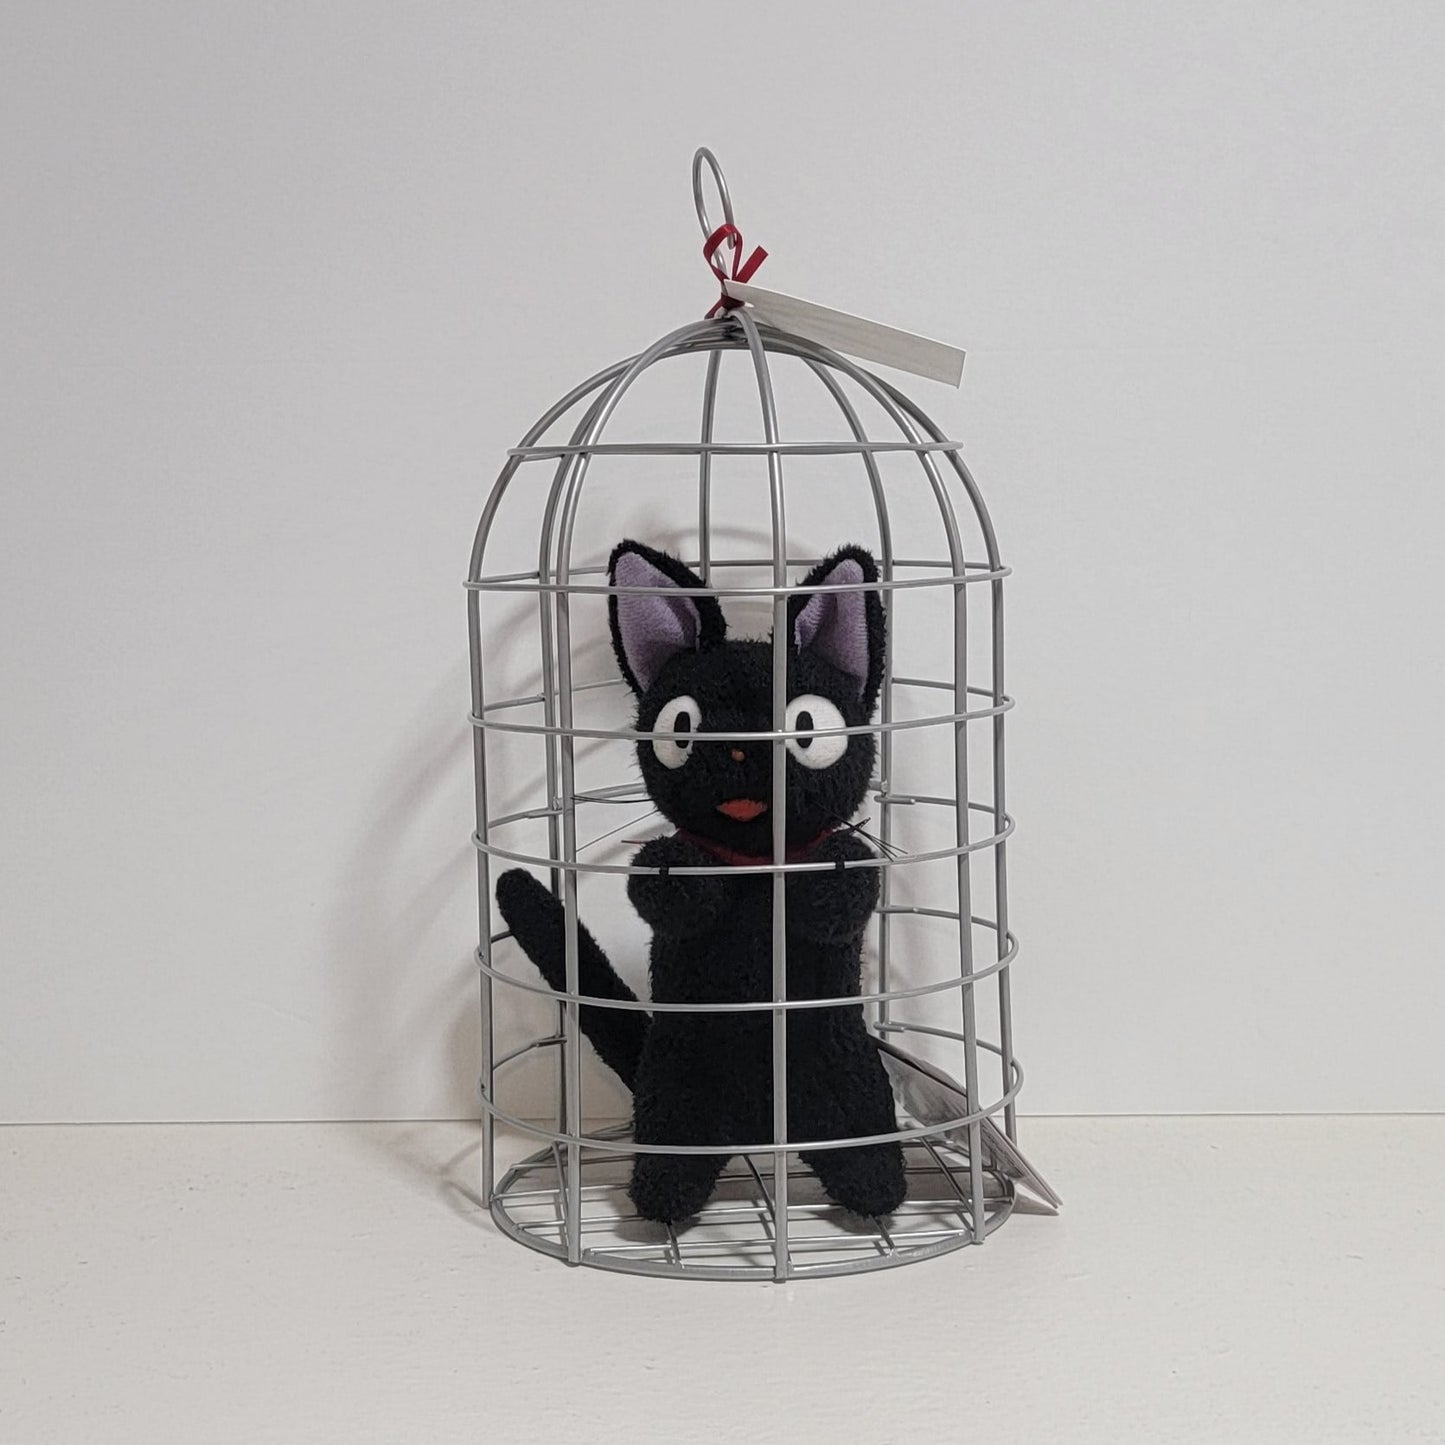 Kiki's Delivery Service Jiji in the Cage - New 2022 Stand Up Ver.